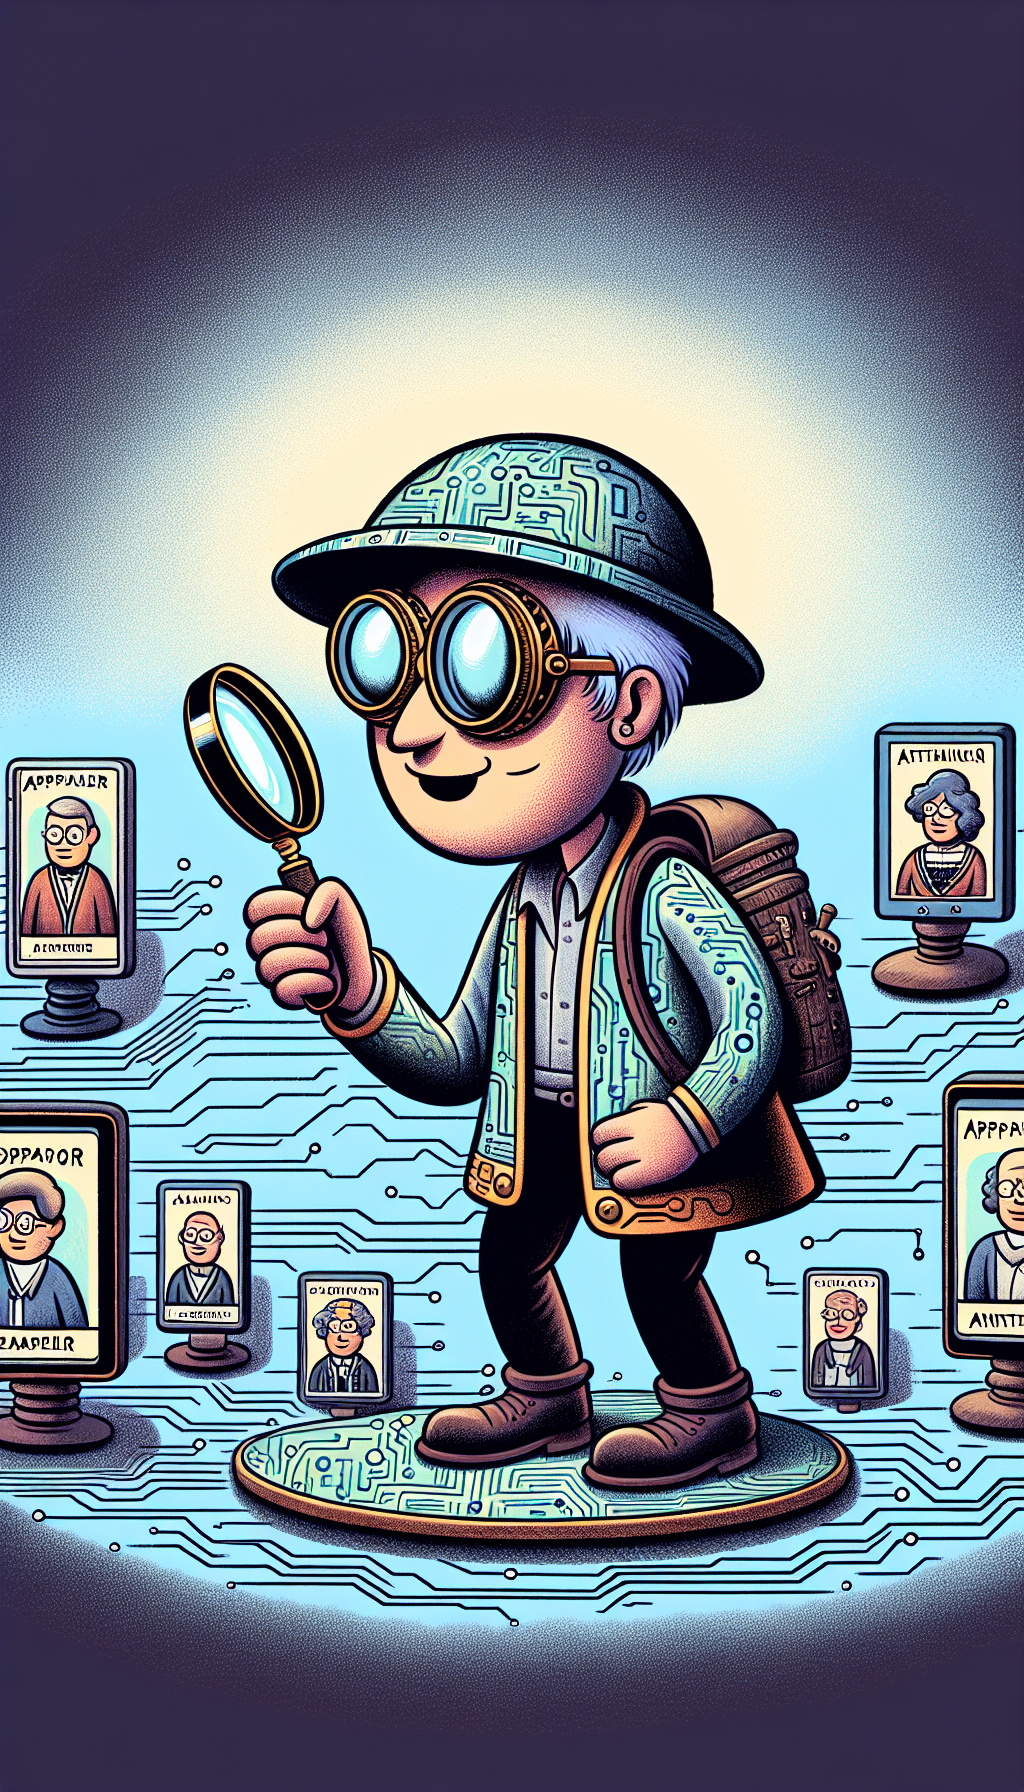 A cartoon-styled, monocled explorer in a digital landscape made of circuitry and code, navigates through a sea of online appraiser avatars with antique objects, using a magnifying glass that highlights authentic, credible appraiser badges while others fade away, symbolizing the discernment needed in finding trustworthy antique appraisals online.